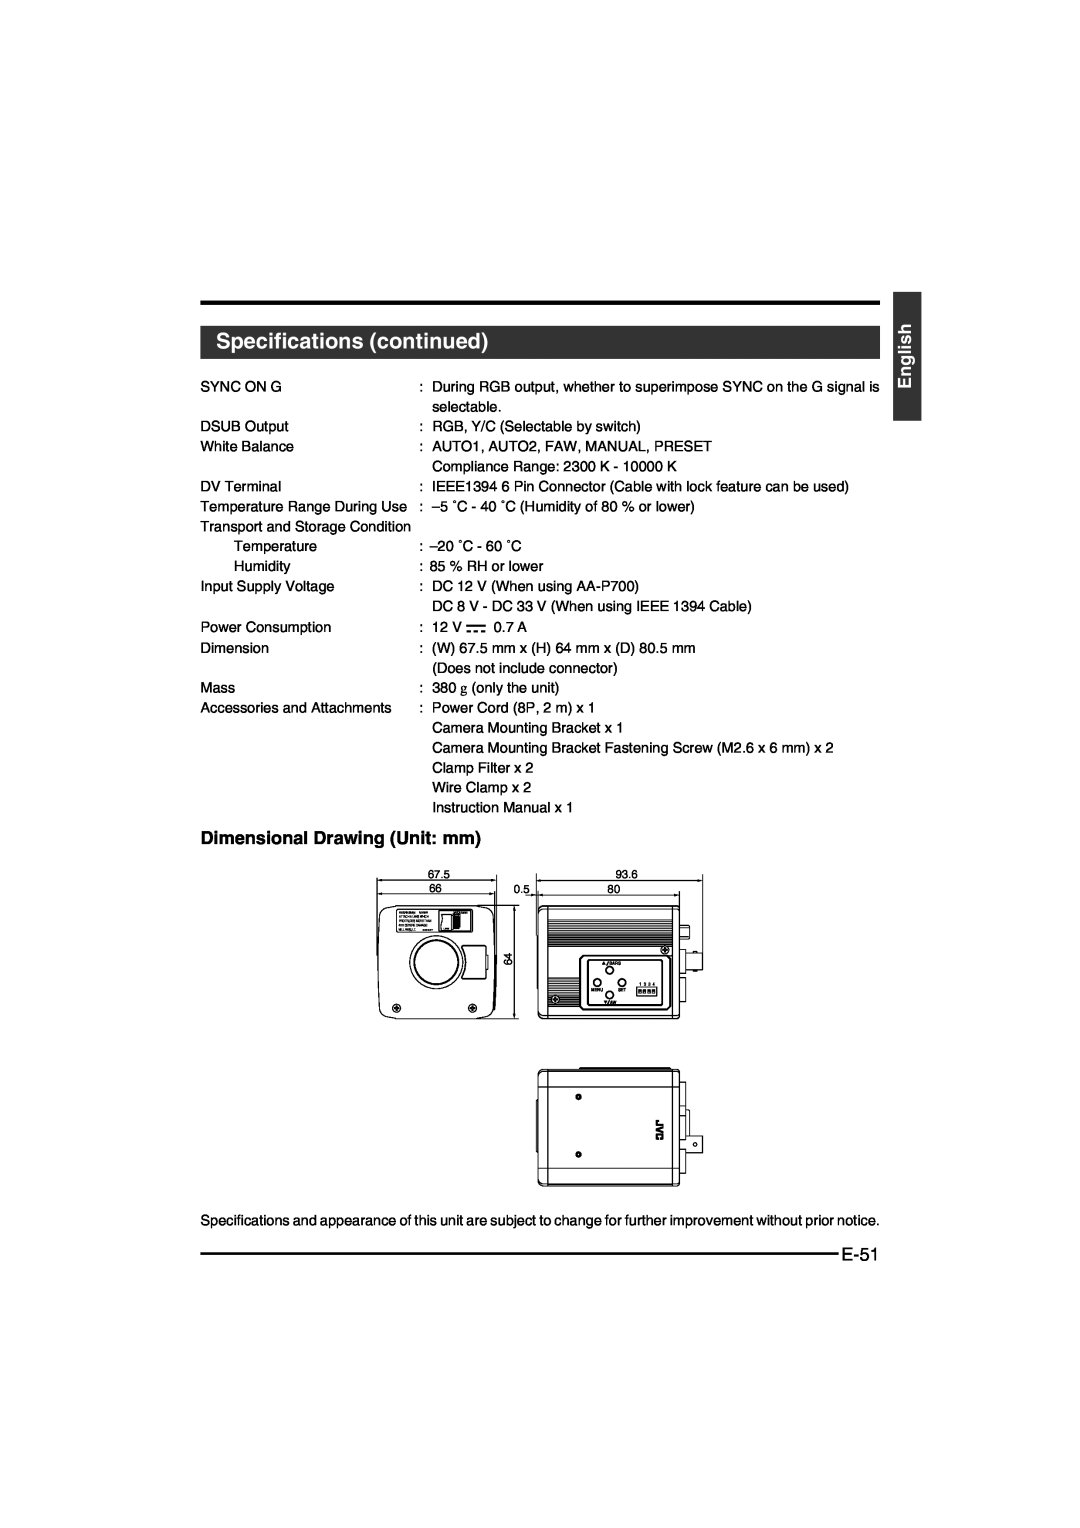 JVC KY-F550E instruction manual Specifications continued, Dimensional Drawing Unit mm, E-51, English 